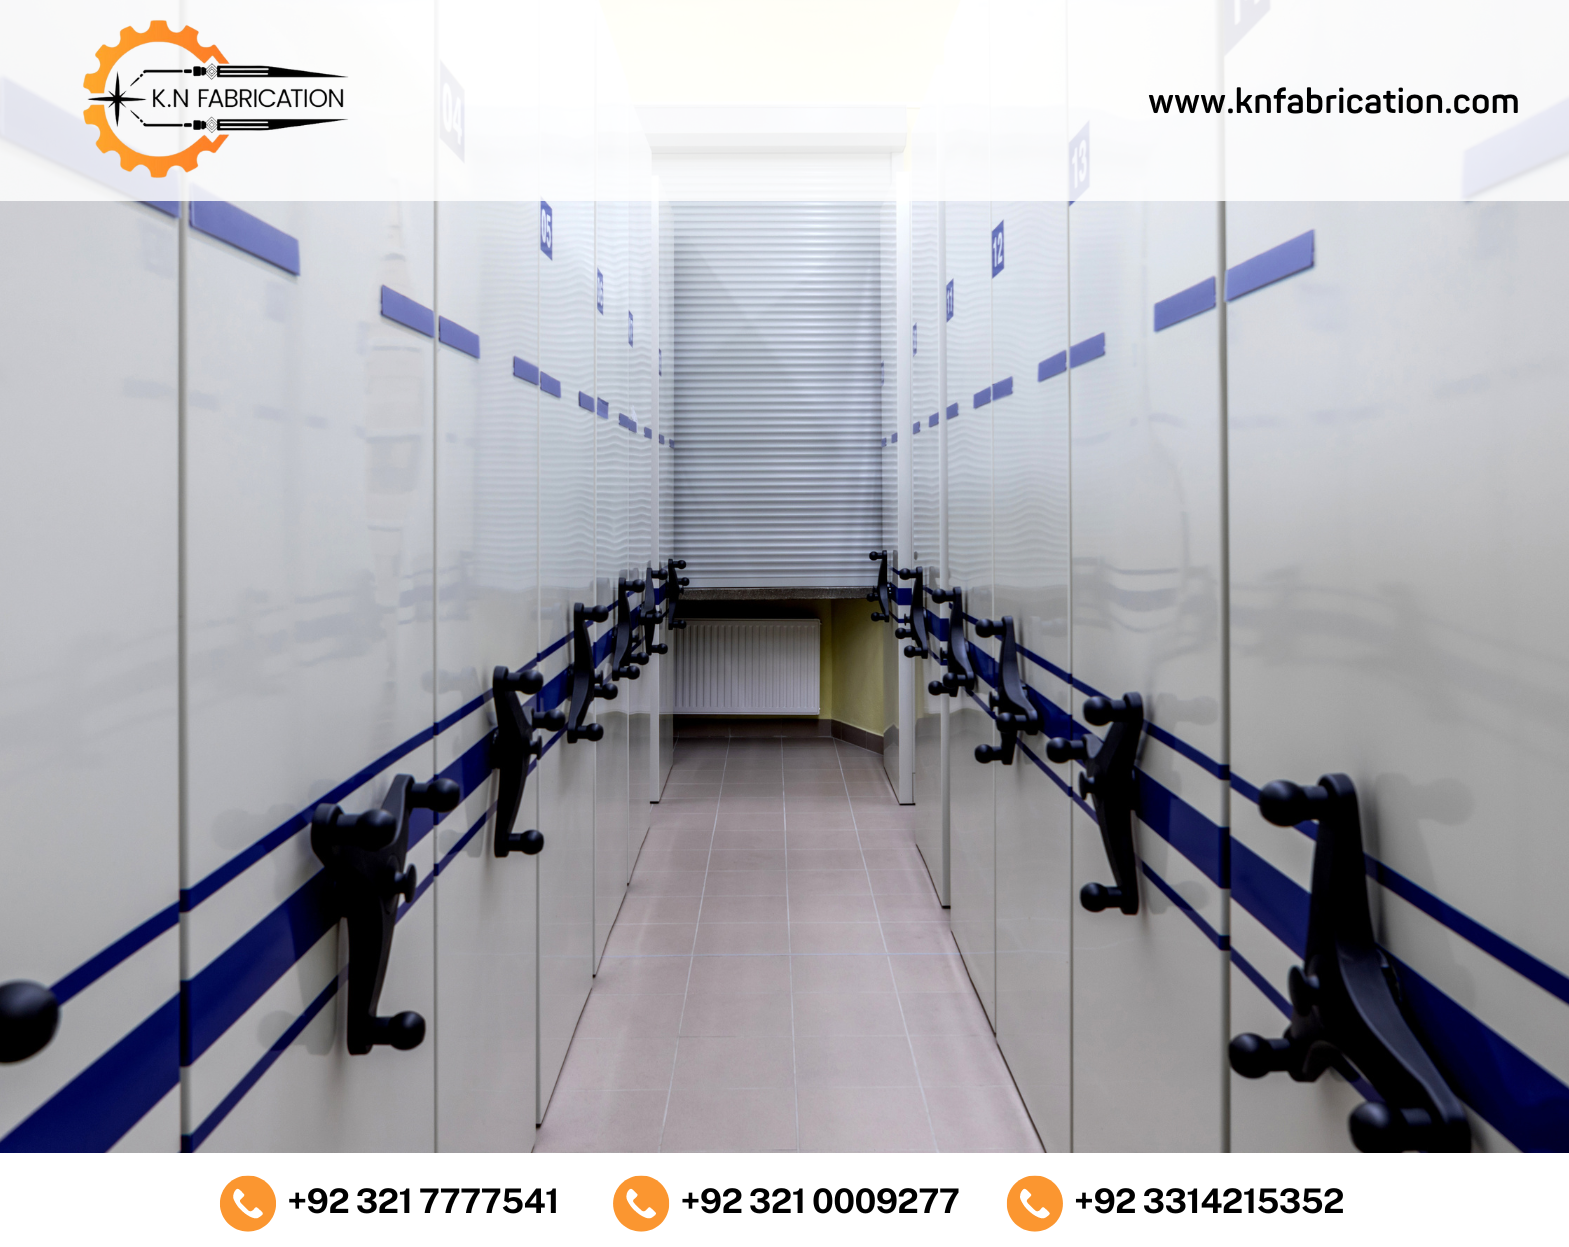 Mobile racking system in Pakistan by KN Fabrication - High-capacity storage solution